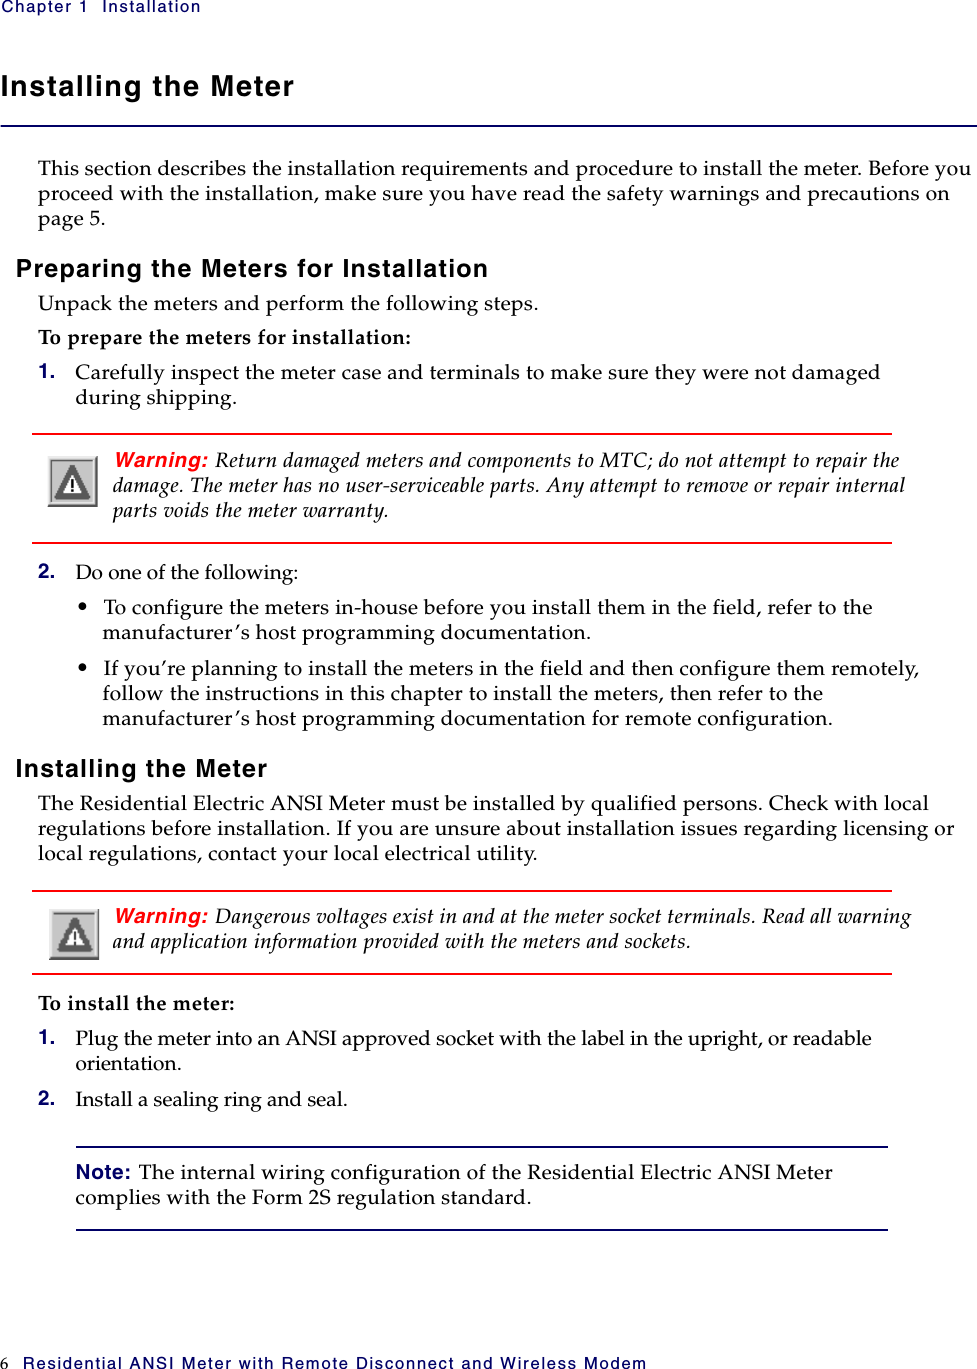 Chapter 1  Installation6 Residential ANSI Meter with Remote Disconnect and Wireless ModemInstalling the MeterThis section describes the installation requirements and procedure to install the meter. Before you proceed with the installation, make sure you have read the safety warnings and precautions on page 5. Preparing the Meters for InstallationUnpack the meters and perform the following steps.To prepare the meters for installation:1. Carefully inspect the meter case and terminals to make sure they were not damaged during shipping.Warning: Return damaged meters and components to MTC; do not attempt to repair the damage. The meter has no user-serviceable parts. Any attempt to remove or repair internal parts voids the meter warranty.2. Do one of the following:•To configure the meters in-house before you install them in the field, refer to the manufacturer’s host programming documentation.•If you’re planning to install the meters in the field and then configure them remotely, follow the instructions in this chapter to install the meters, then refer to the manufacturer’s host programming documentation for remote configuration.Installing the MeterThe Residential Electric ANSI Meter must be installed by qualified persons. Check with local regulations before installation. If you are unsure about installation issues regarding licensing or local regulations, contact your local electrical utility.Warning: Dangerous voltages exist in and at the meter socket terminals. Read all warning and application information provided with the meters and sockets.To install the meter:1. Plug the meter into an ANSI approved socket with the label in the upright, or readable orientation.2. Install a sealing ring and seal.Note: The internal wiring configuration of the Residential Electric ANSI Meter complies with the Form 2S regulation standard.